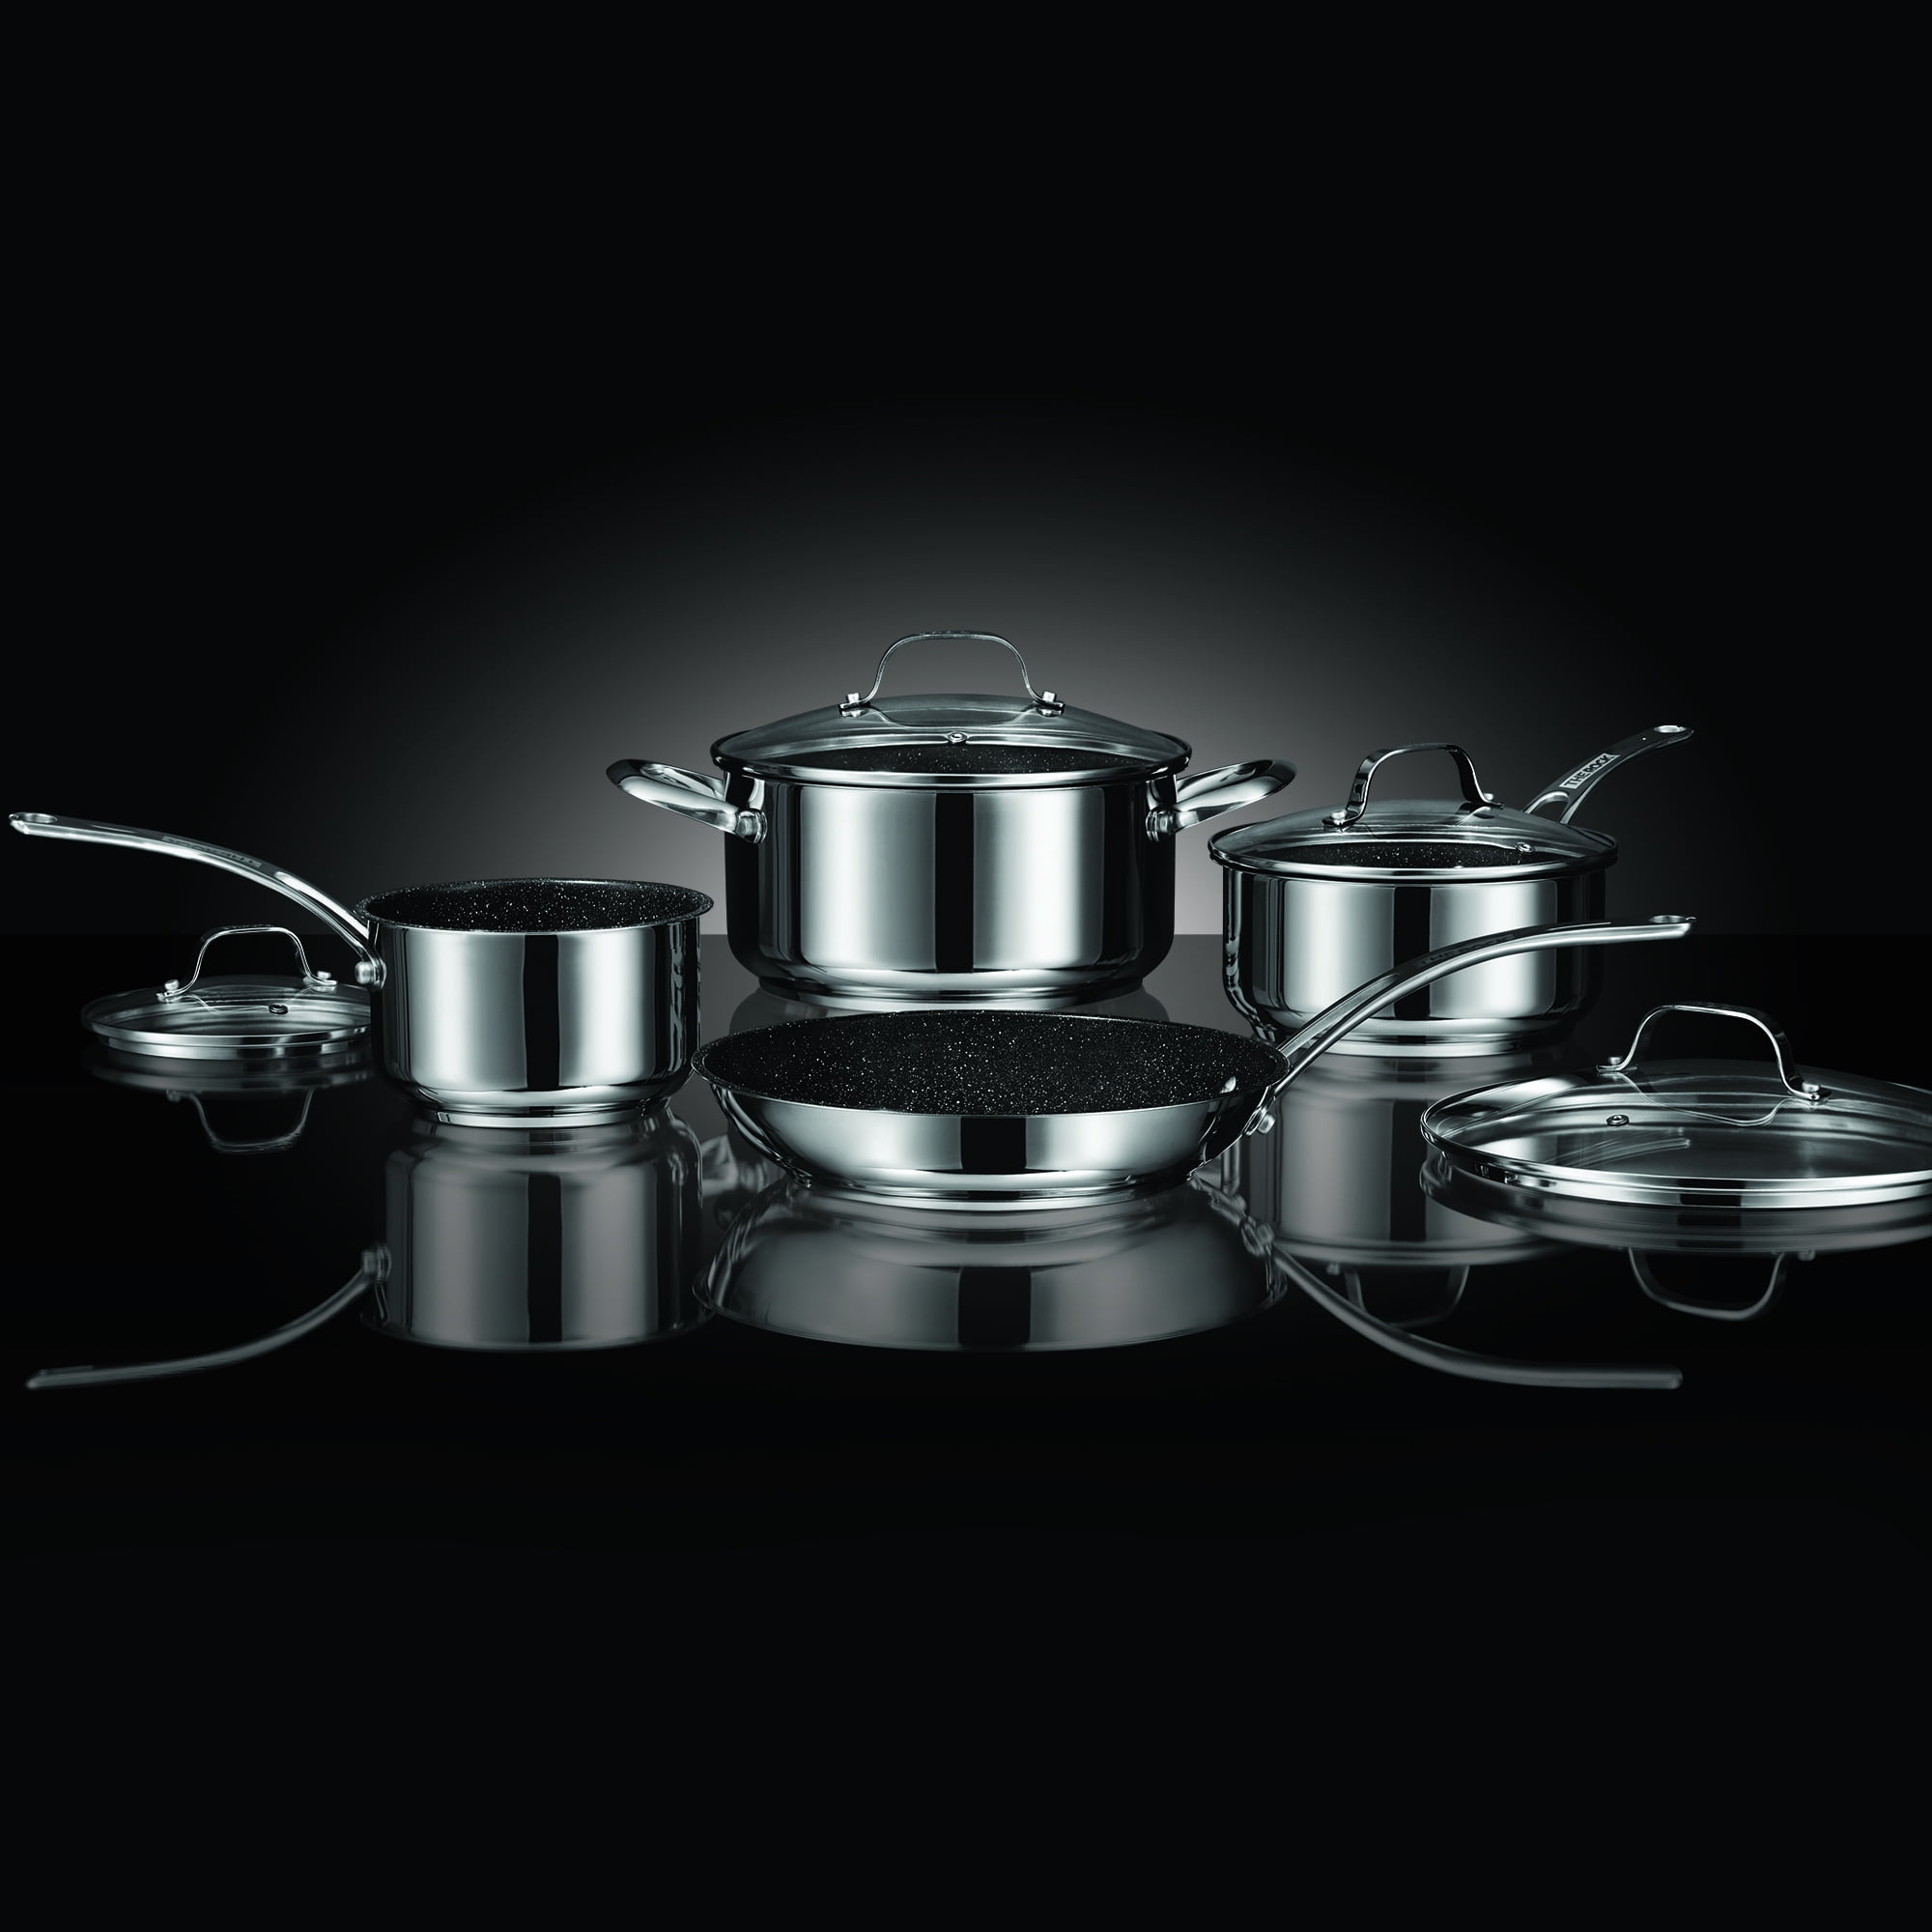 THE ROCK by Starfrit 10-Piece Cookware Set with Stainless Steel Handles,  Black